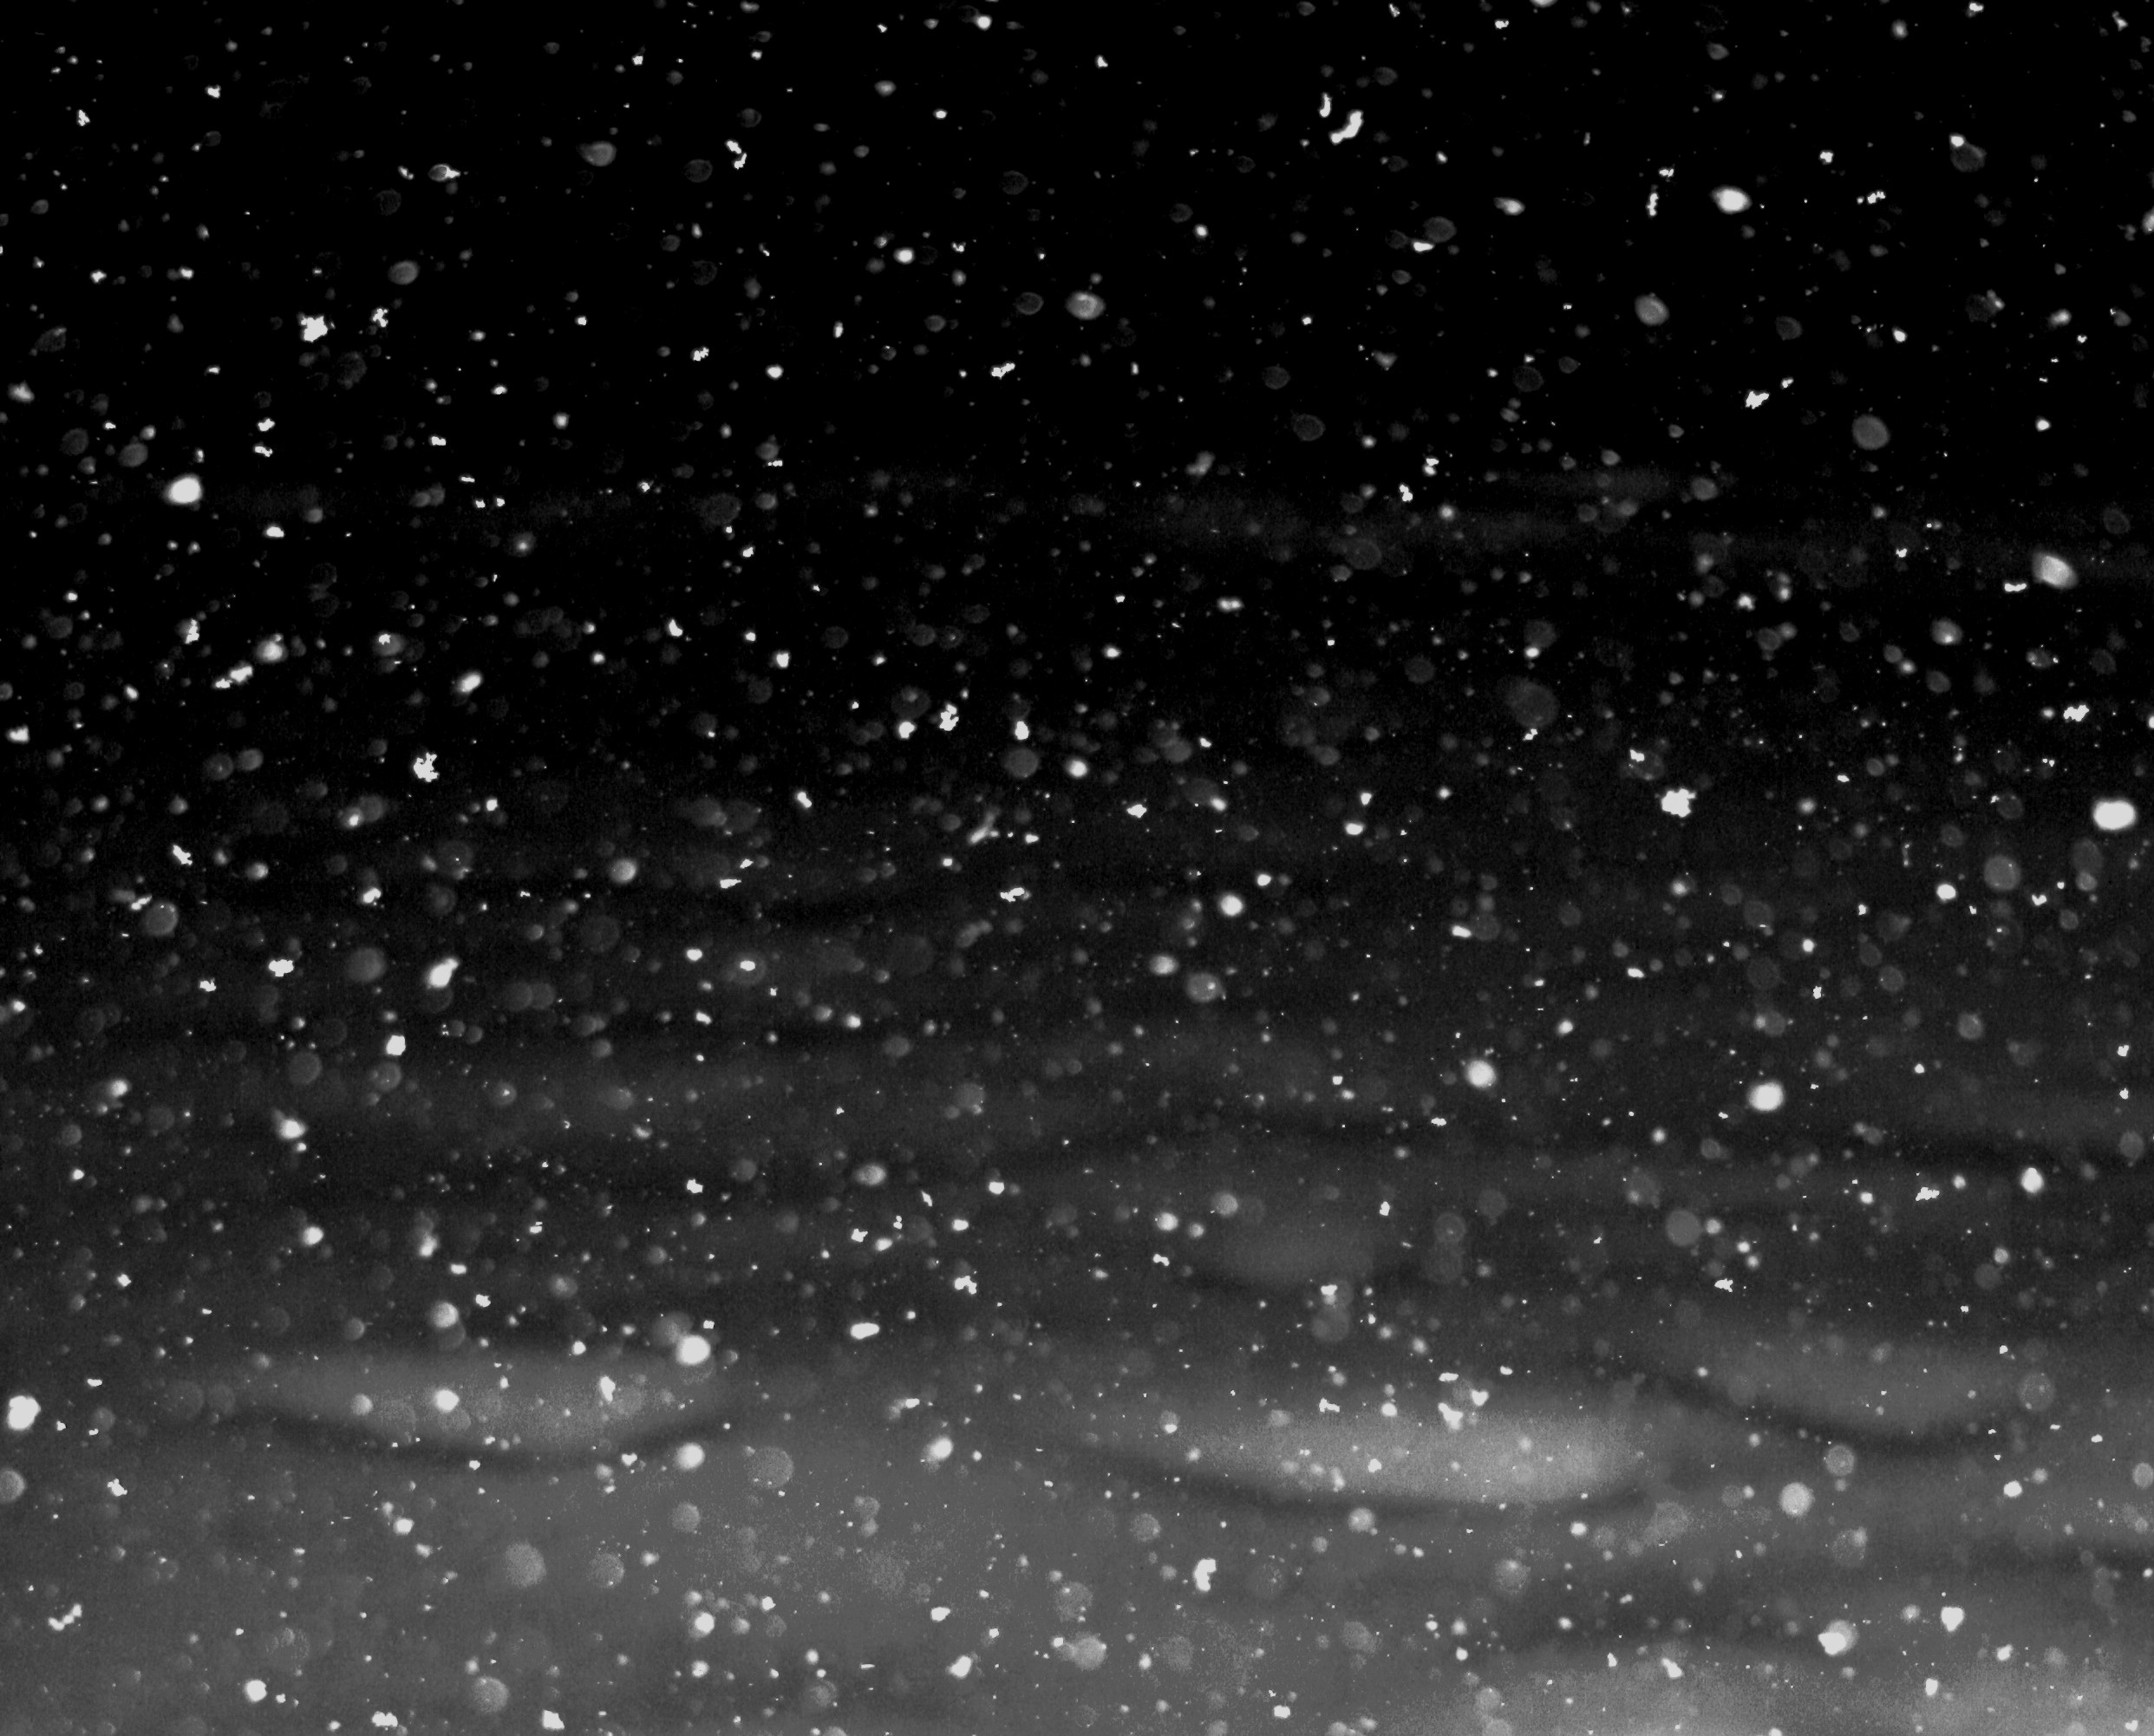 2484x2002 File:Free snowflakes falling at Night texture for layers Creative Commons  (3061623692).